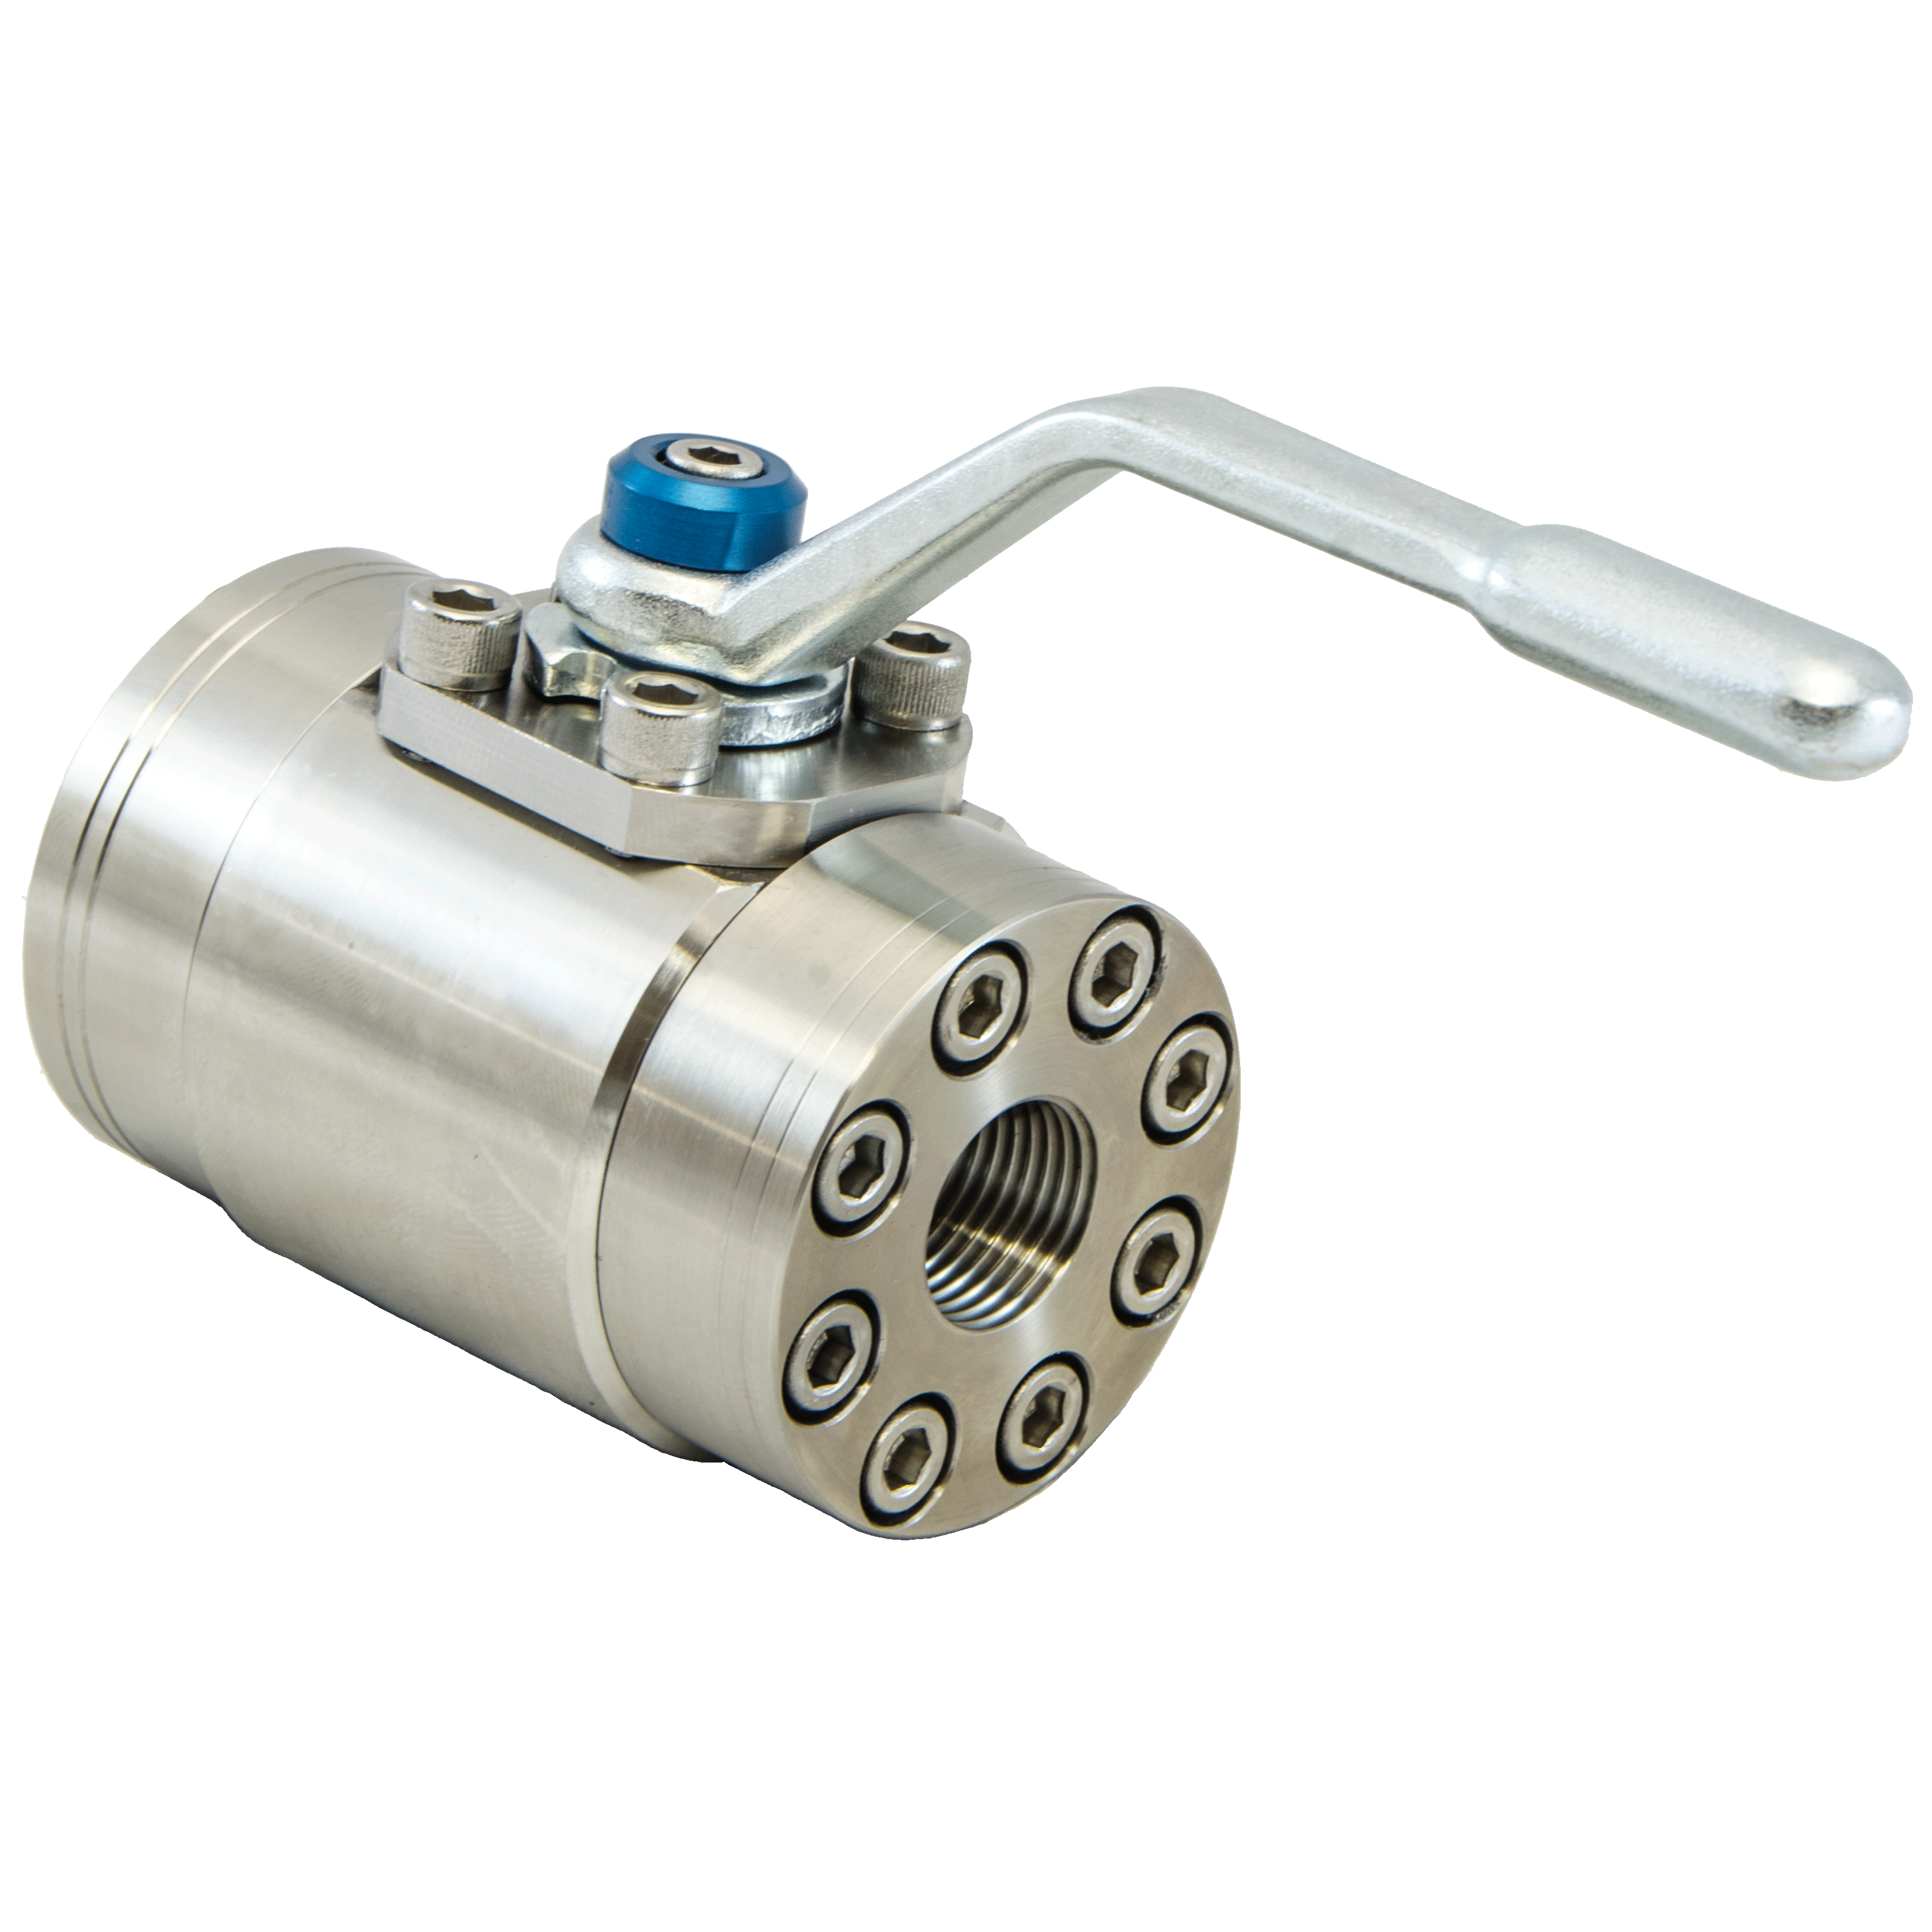 BVQG-2000N-2211 : DMIC Stainless Gas Ball Valve, 2 NPT, 316 Stainless Steel, 6000psi, Two-Way